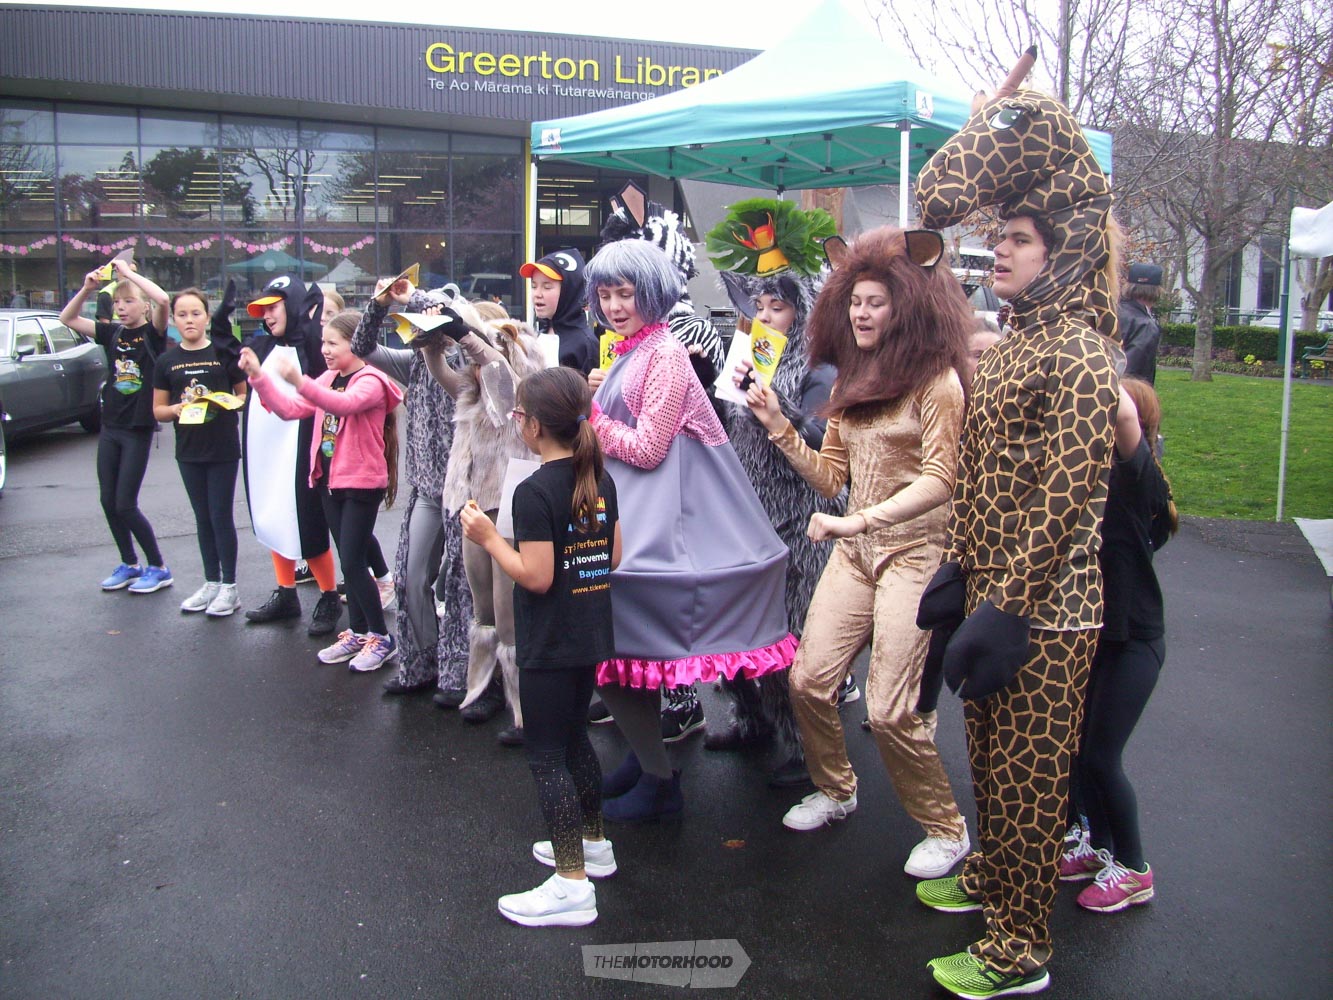 These girls from Greerton will be performing 'Madagascar' at Baycourt in Tauranga on the 3rd & 4th of No.jpg